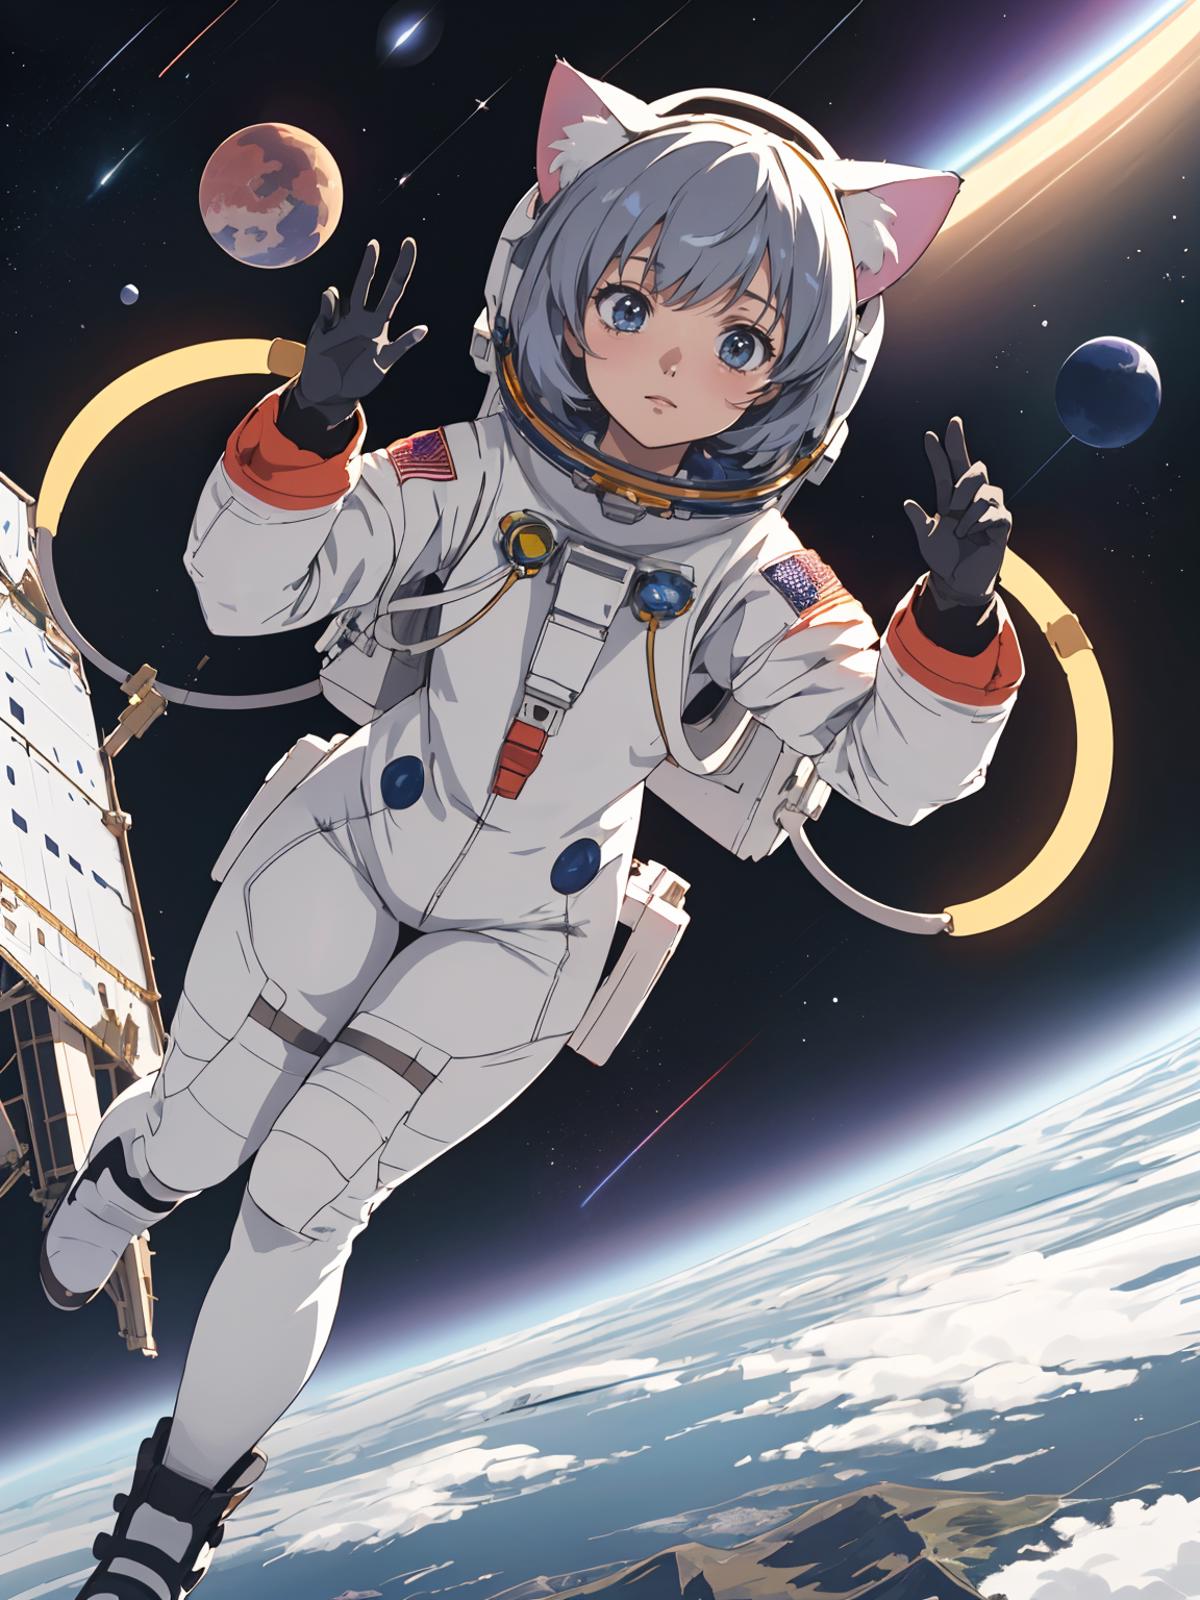 Anime Character Space Suit with Gloves, American Flag, and Planets in Background